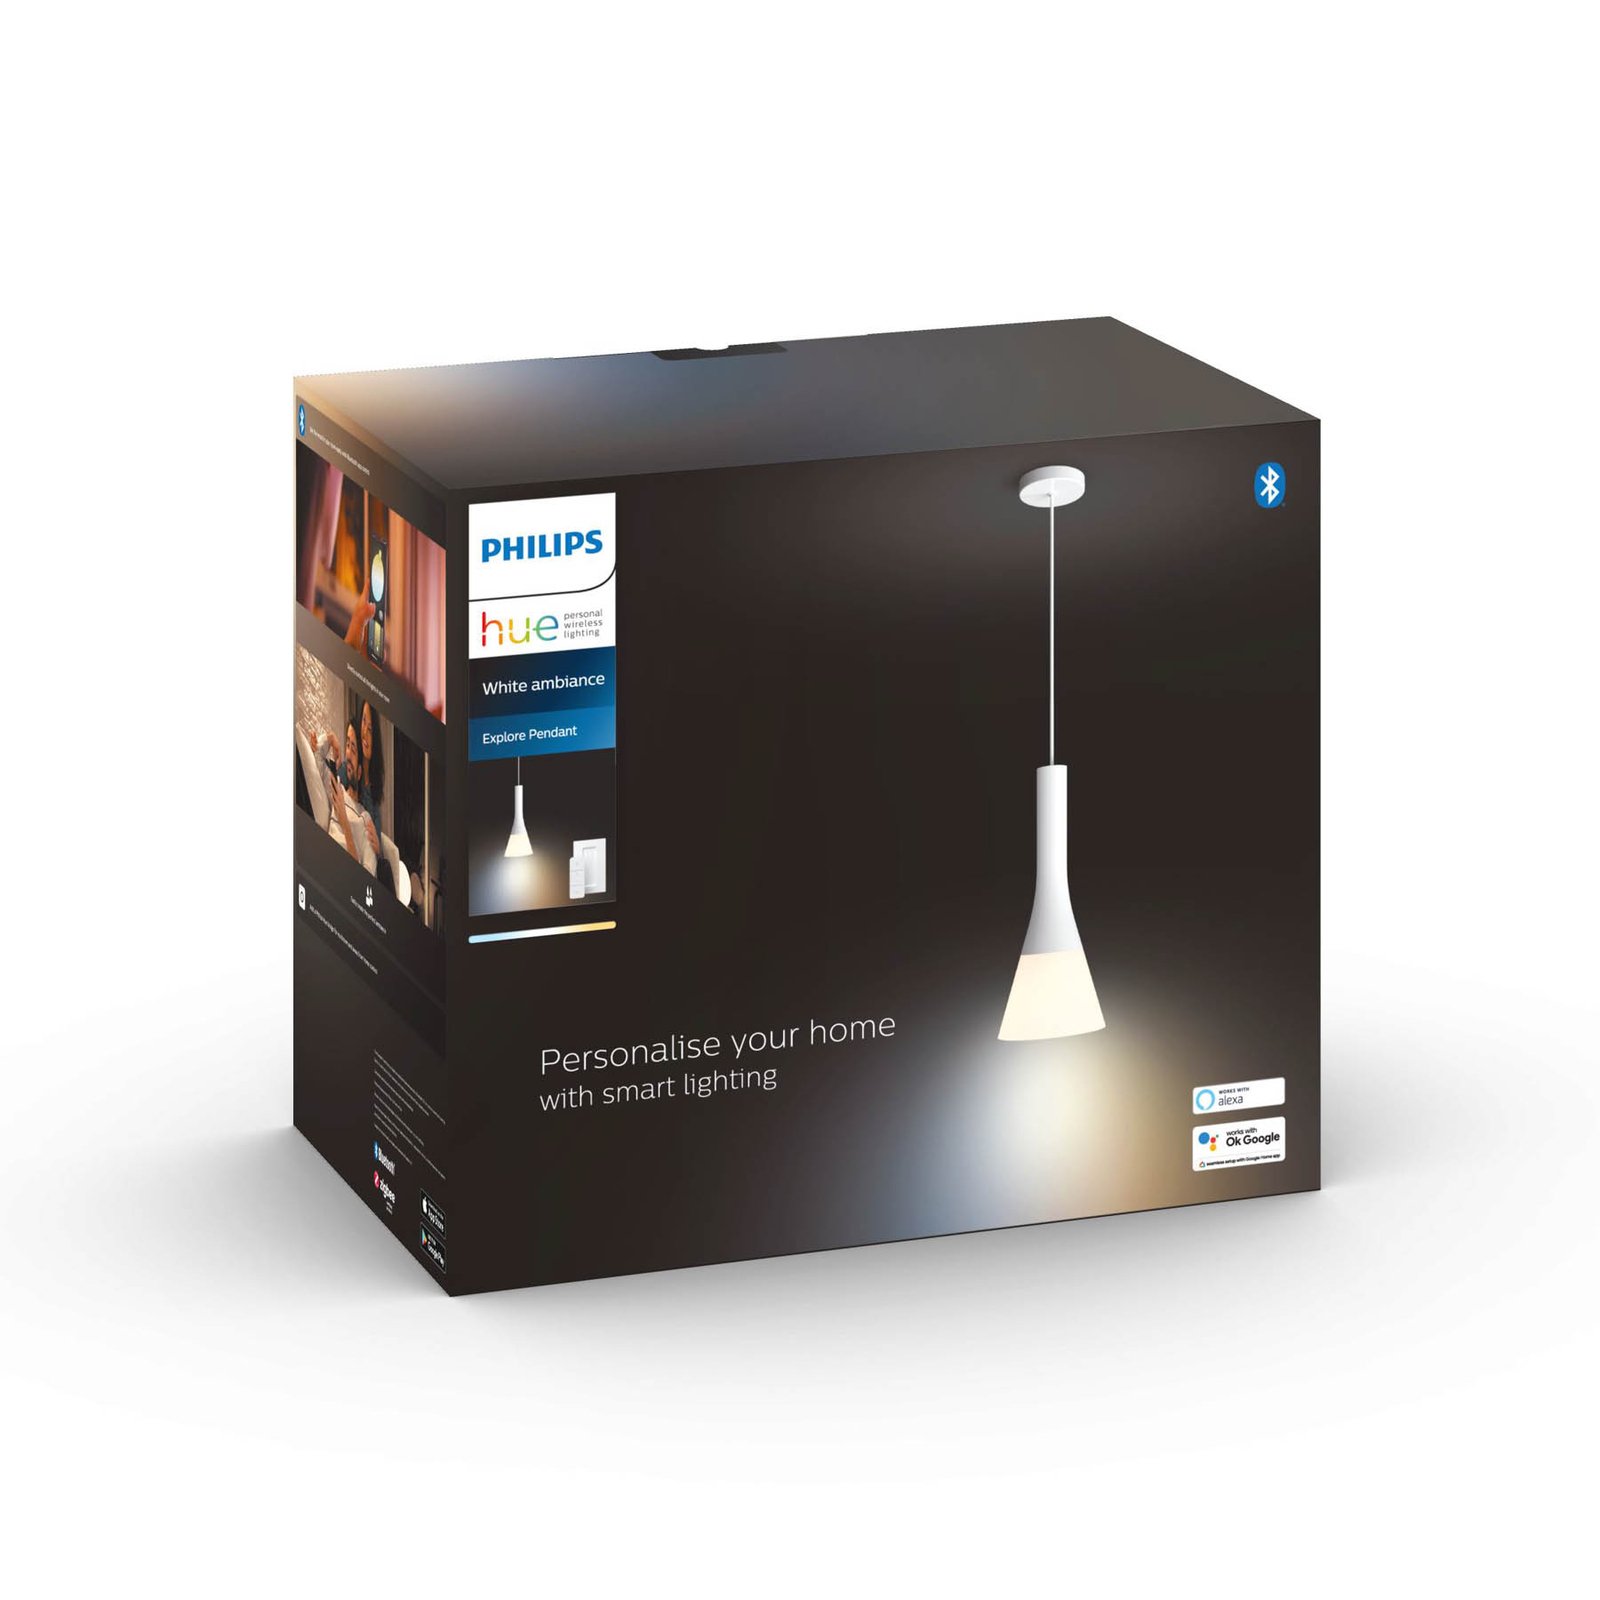 Philips Hue White Ambiance sospensione, dimmer